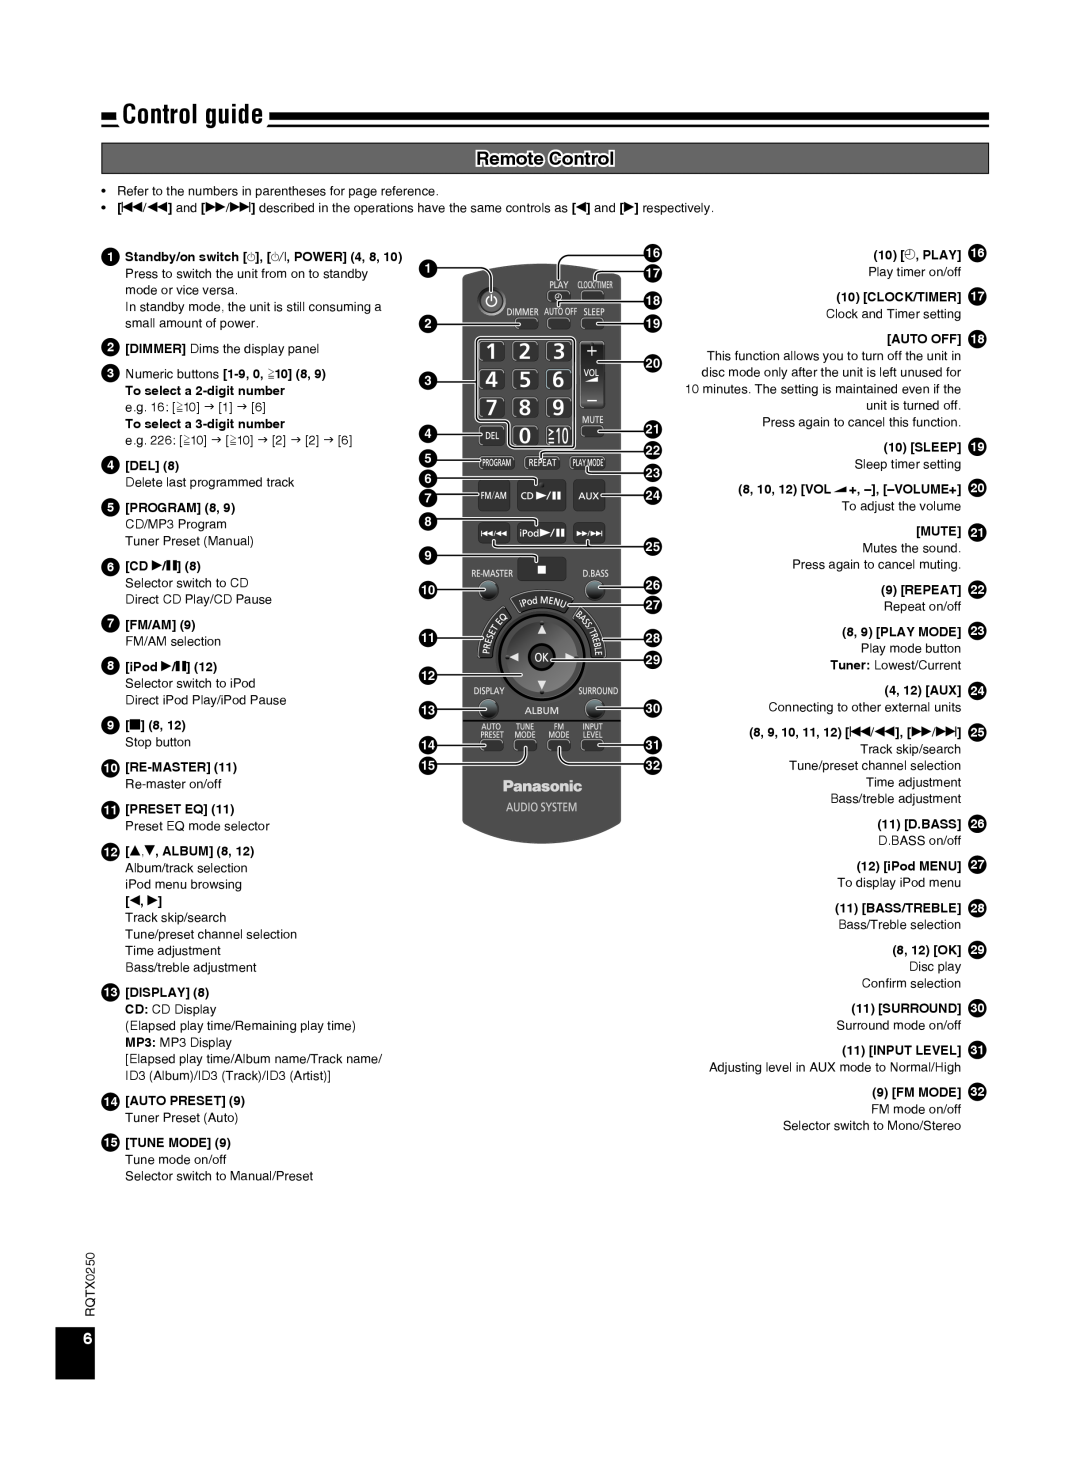 Panasonic SC-HC3 operating instructions Control guide, Remote Control 